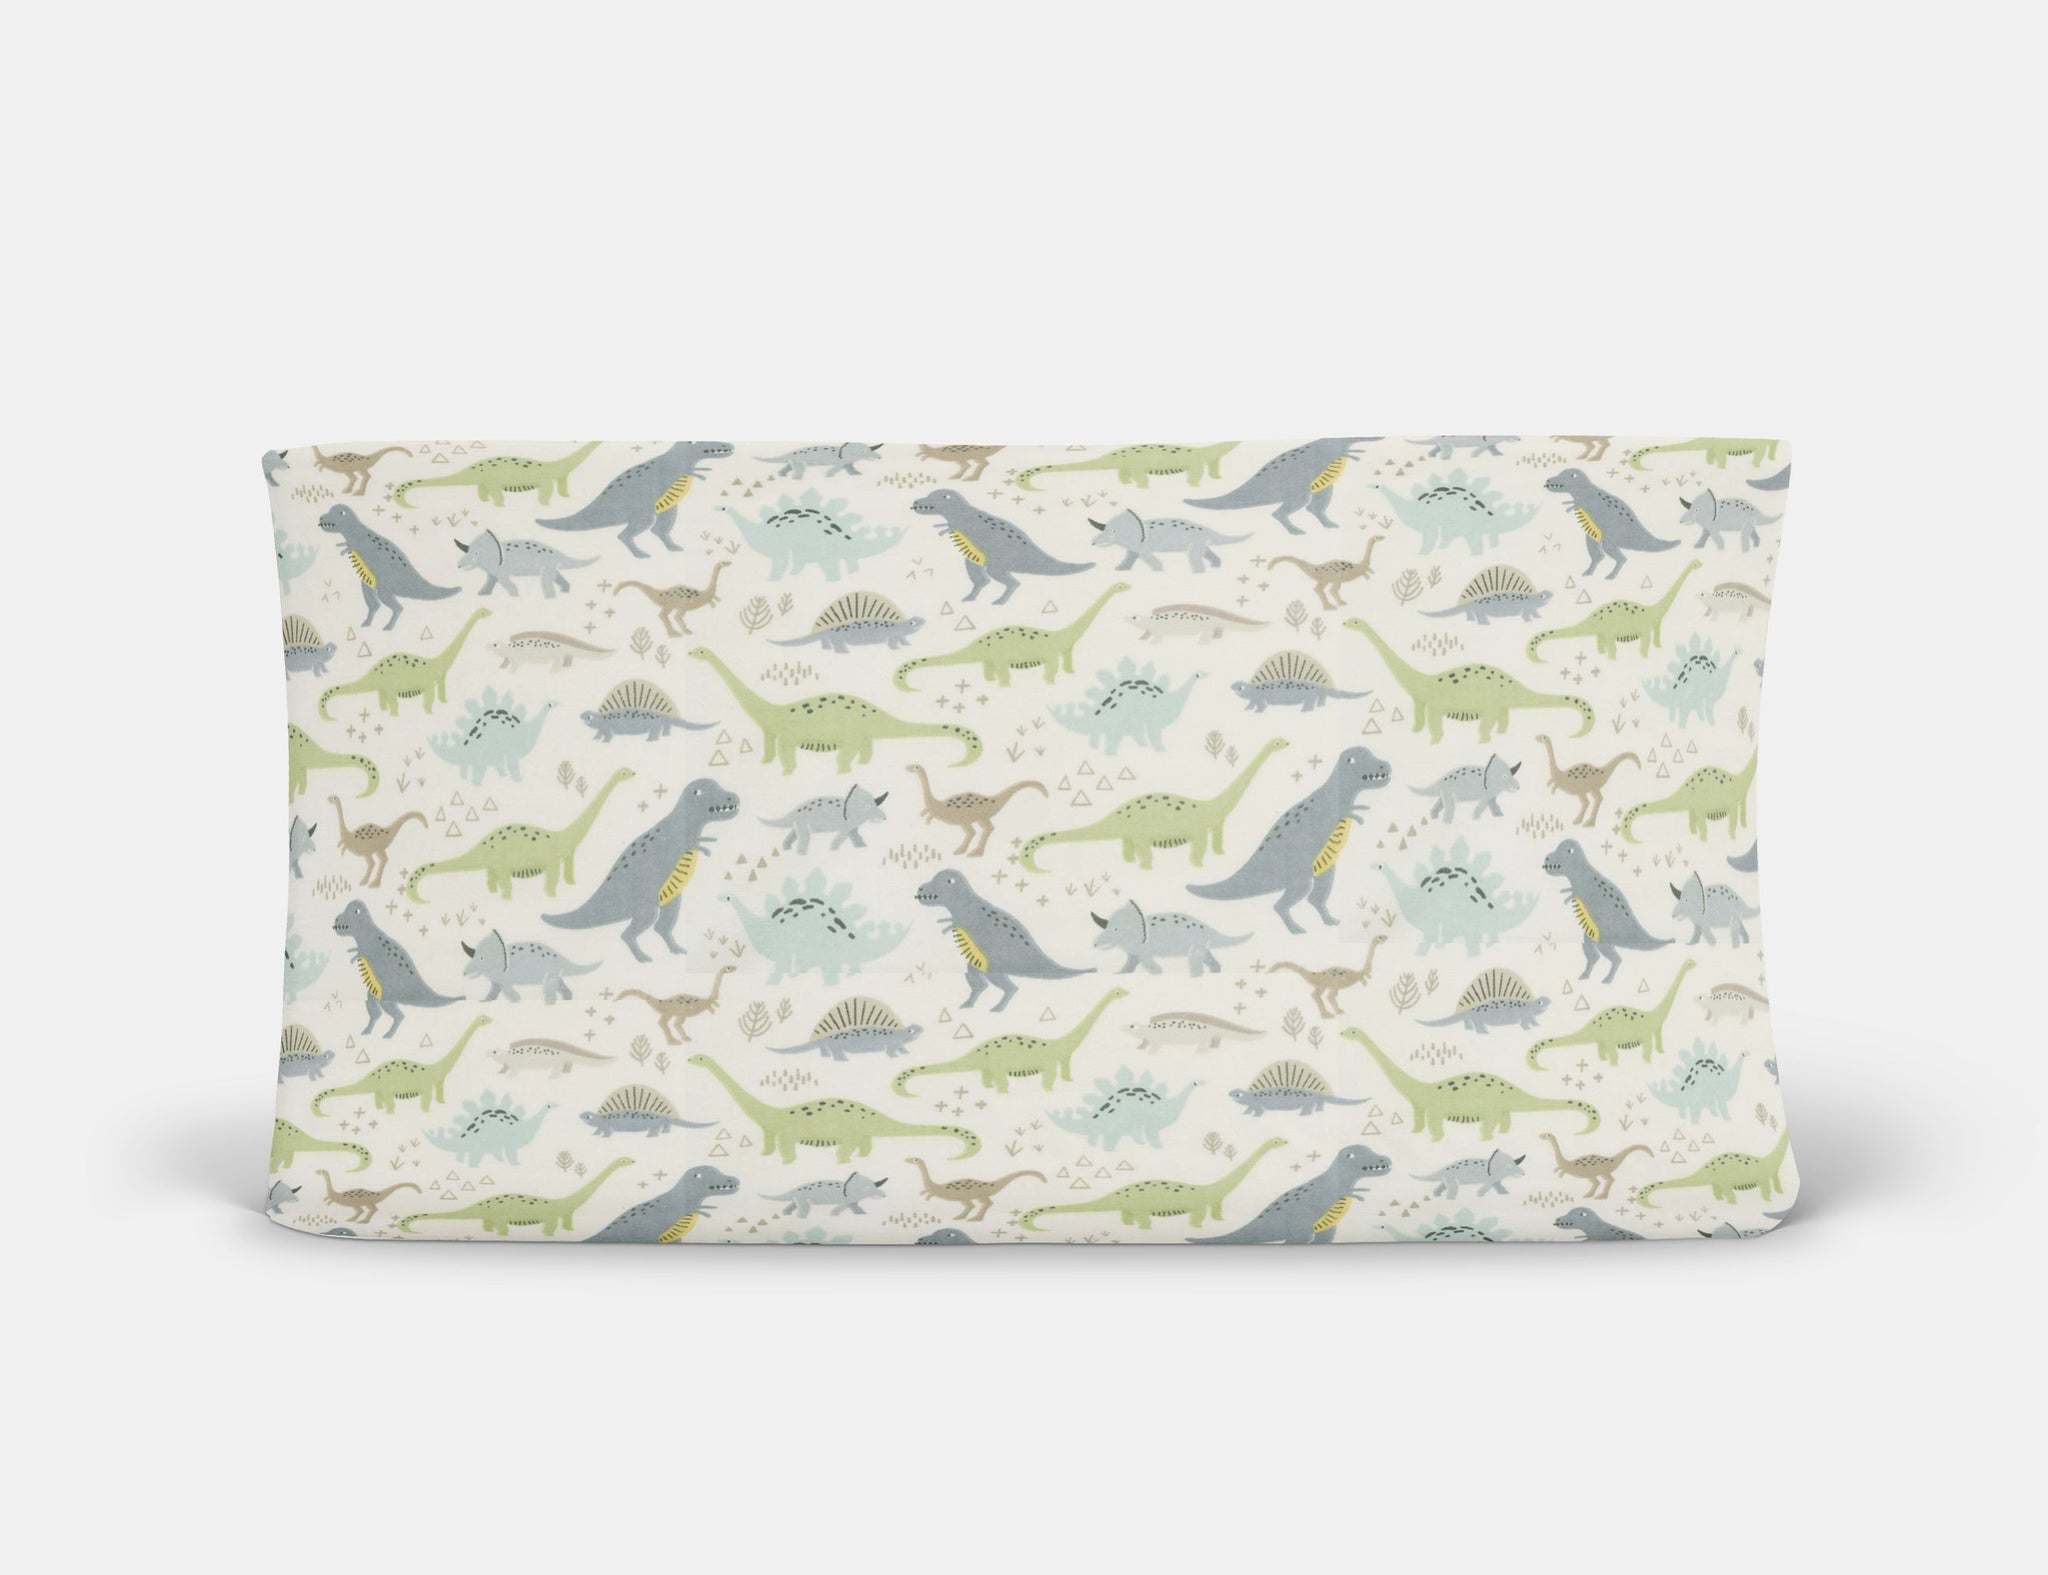 Fossil Rim Changing Pad Cover